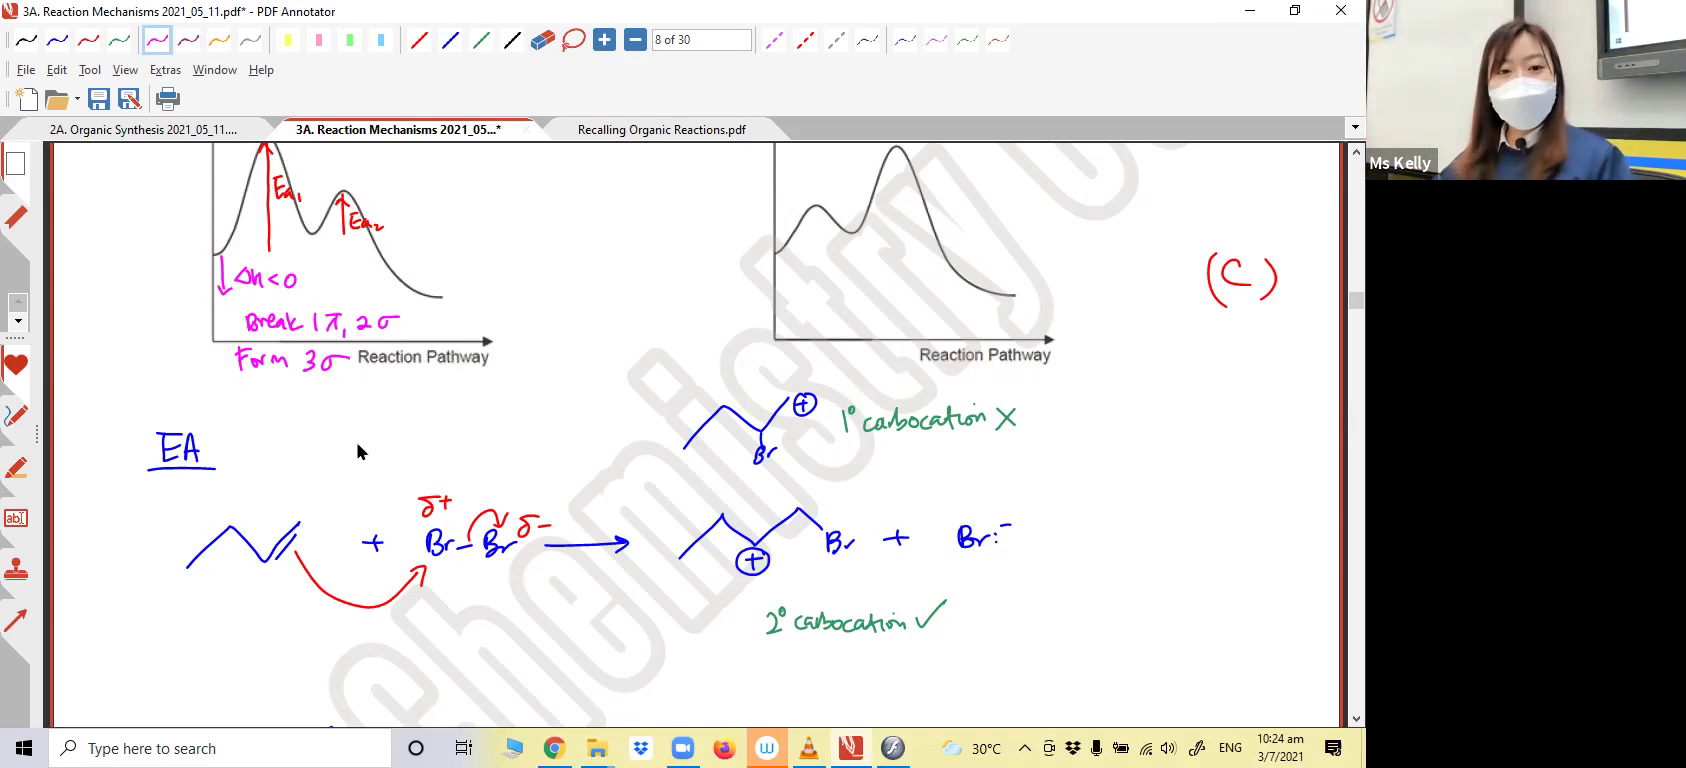 [HYDROCARBONS REVISION] Electrophilic Addition